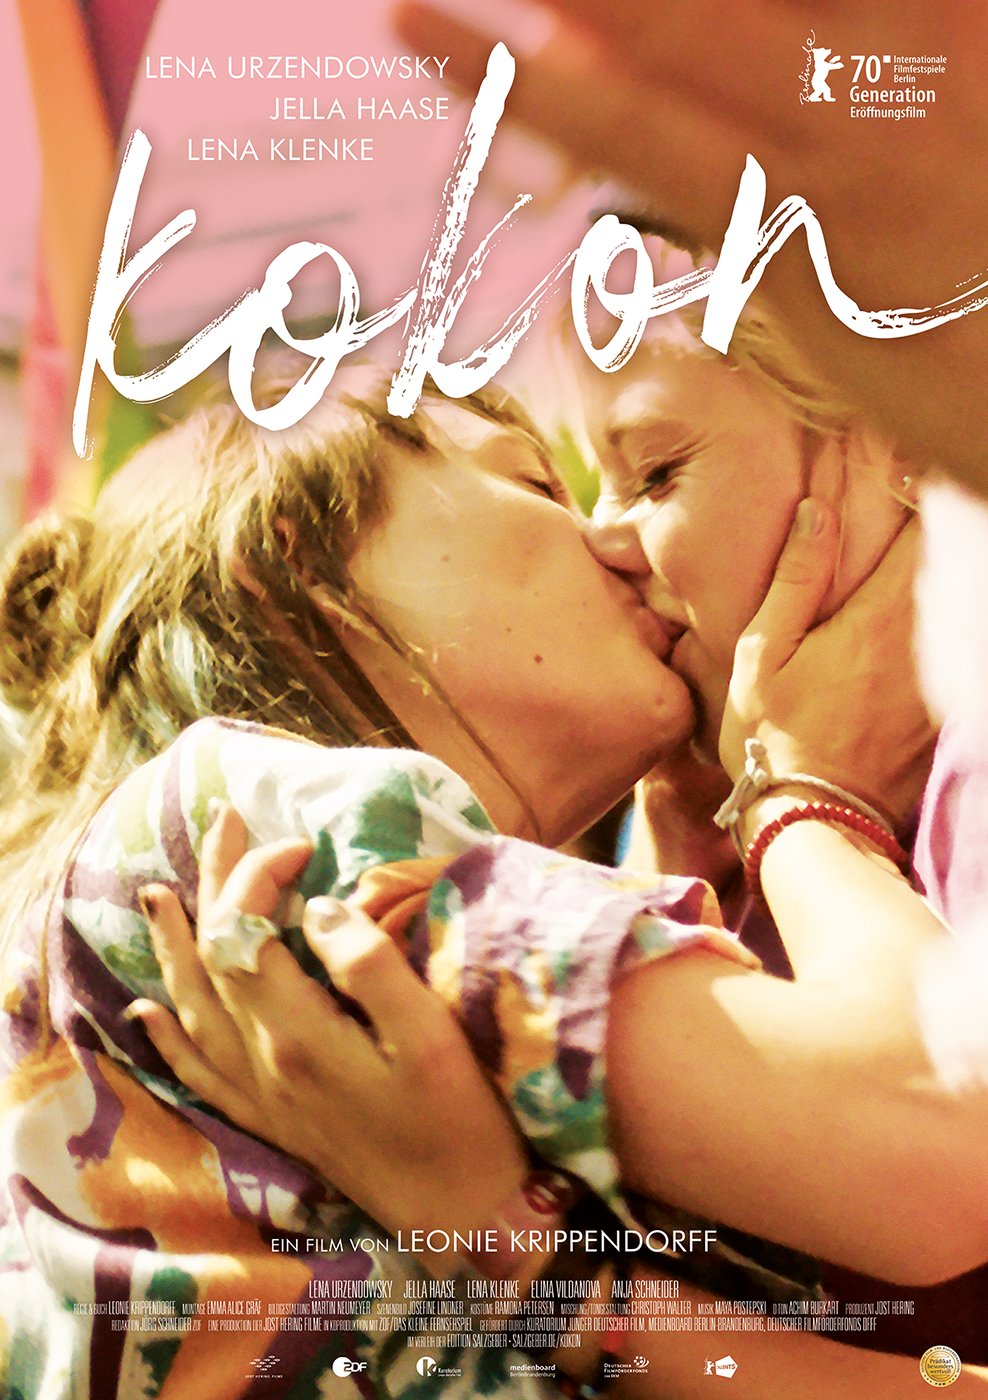 film poster of two women kissing